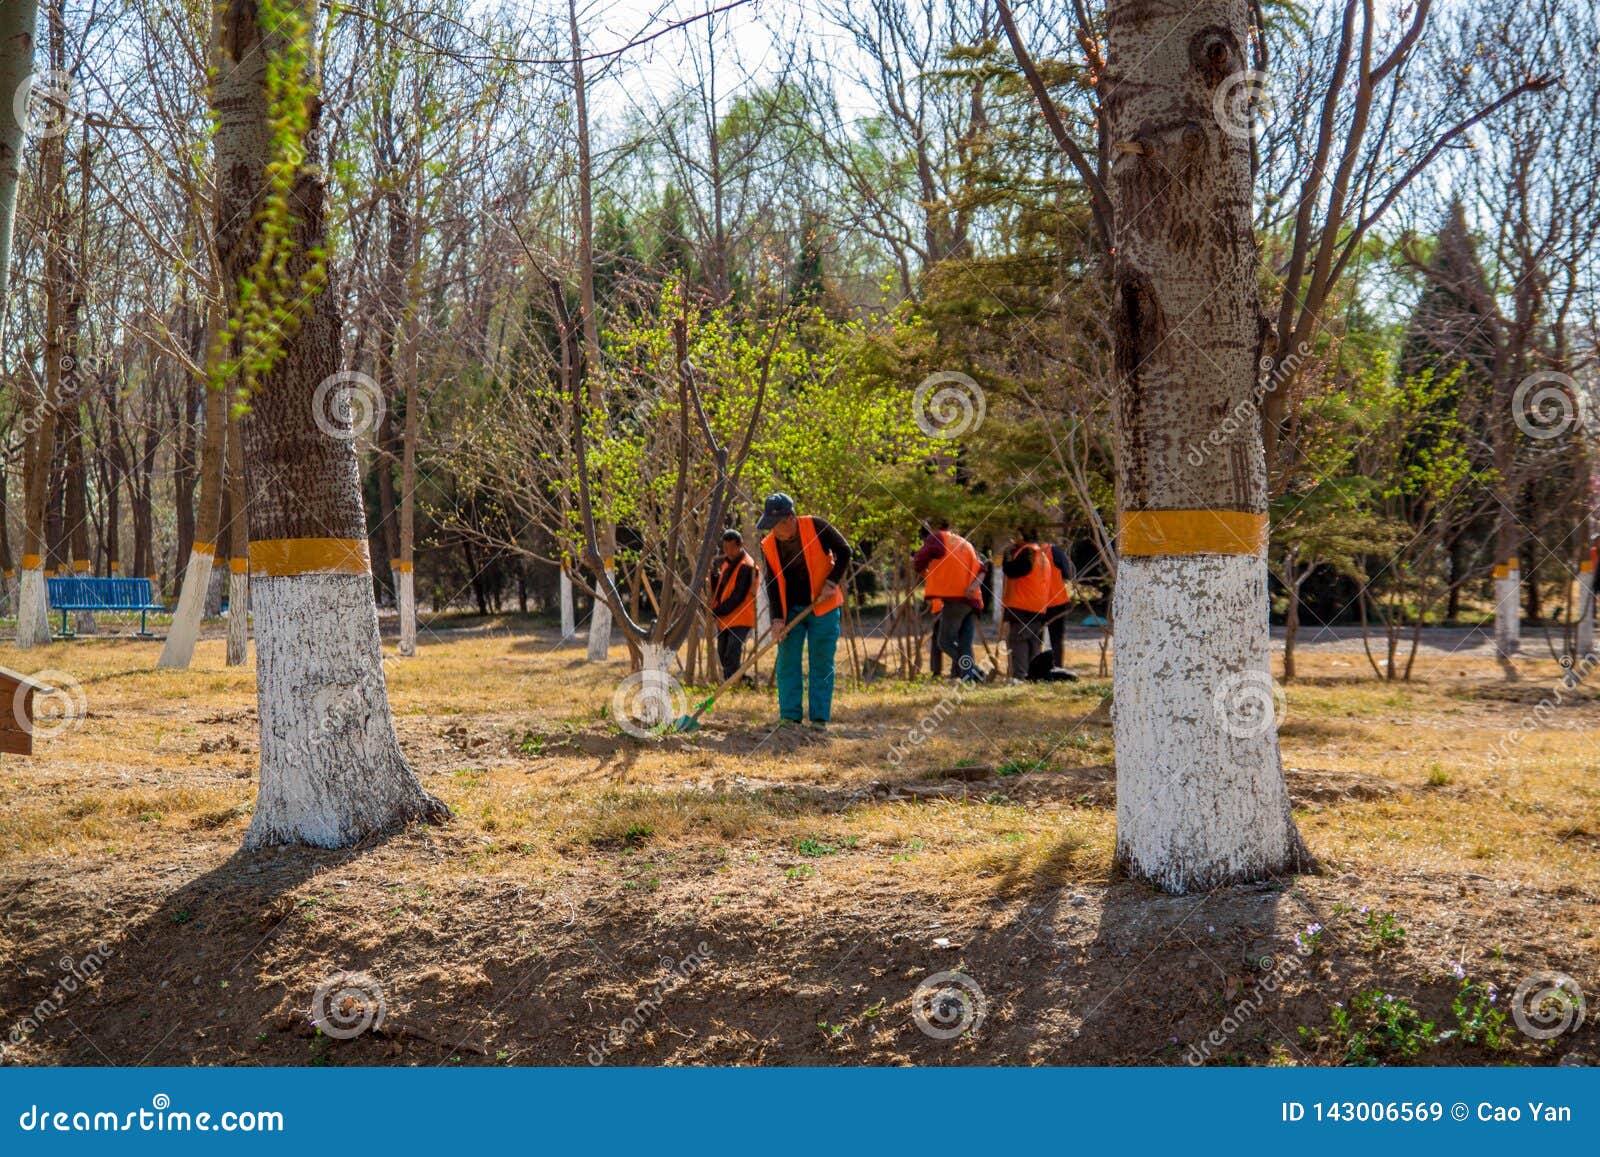 Team of Workers Ready To Start Planting Trees with Their Shovels on a